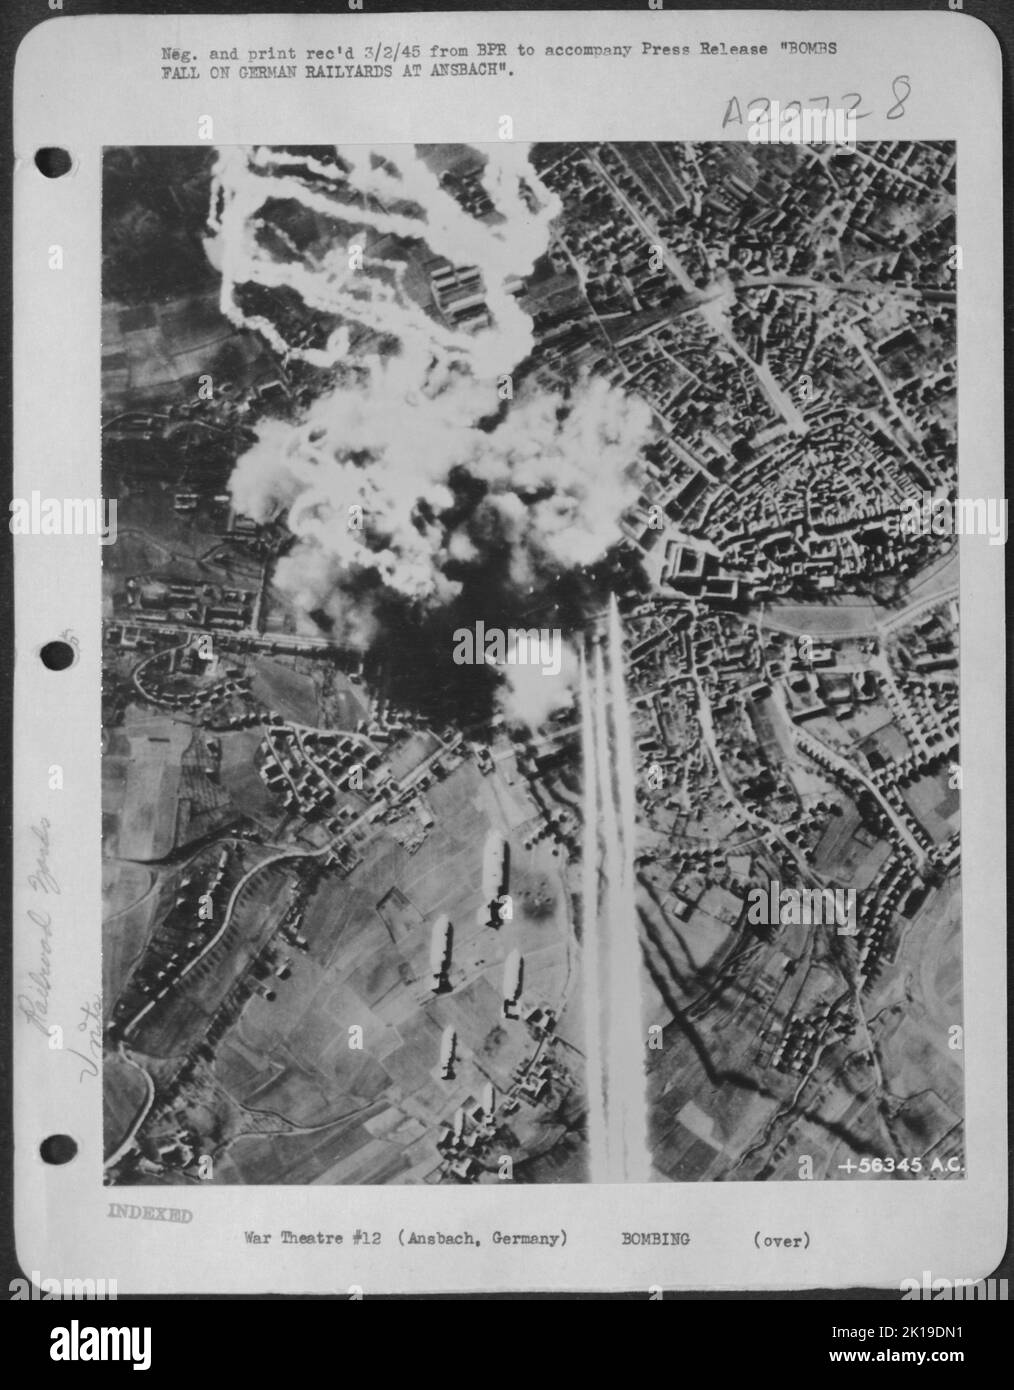 BOMBS FALL ON GERMAN RAILYARDS AT ANSBACH--Bombs from U.S. Army 8th Air Force B-17 Flying Fortresses of the Third Air Division fall on and around the vital railway marshalling yards at Ansbach, Germany, making tangled wreckage of the Stock Photo